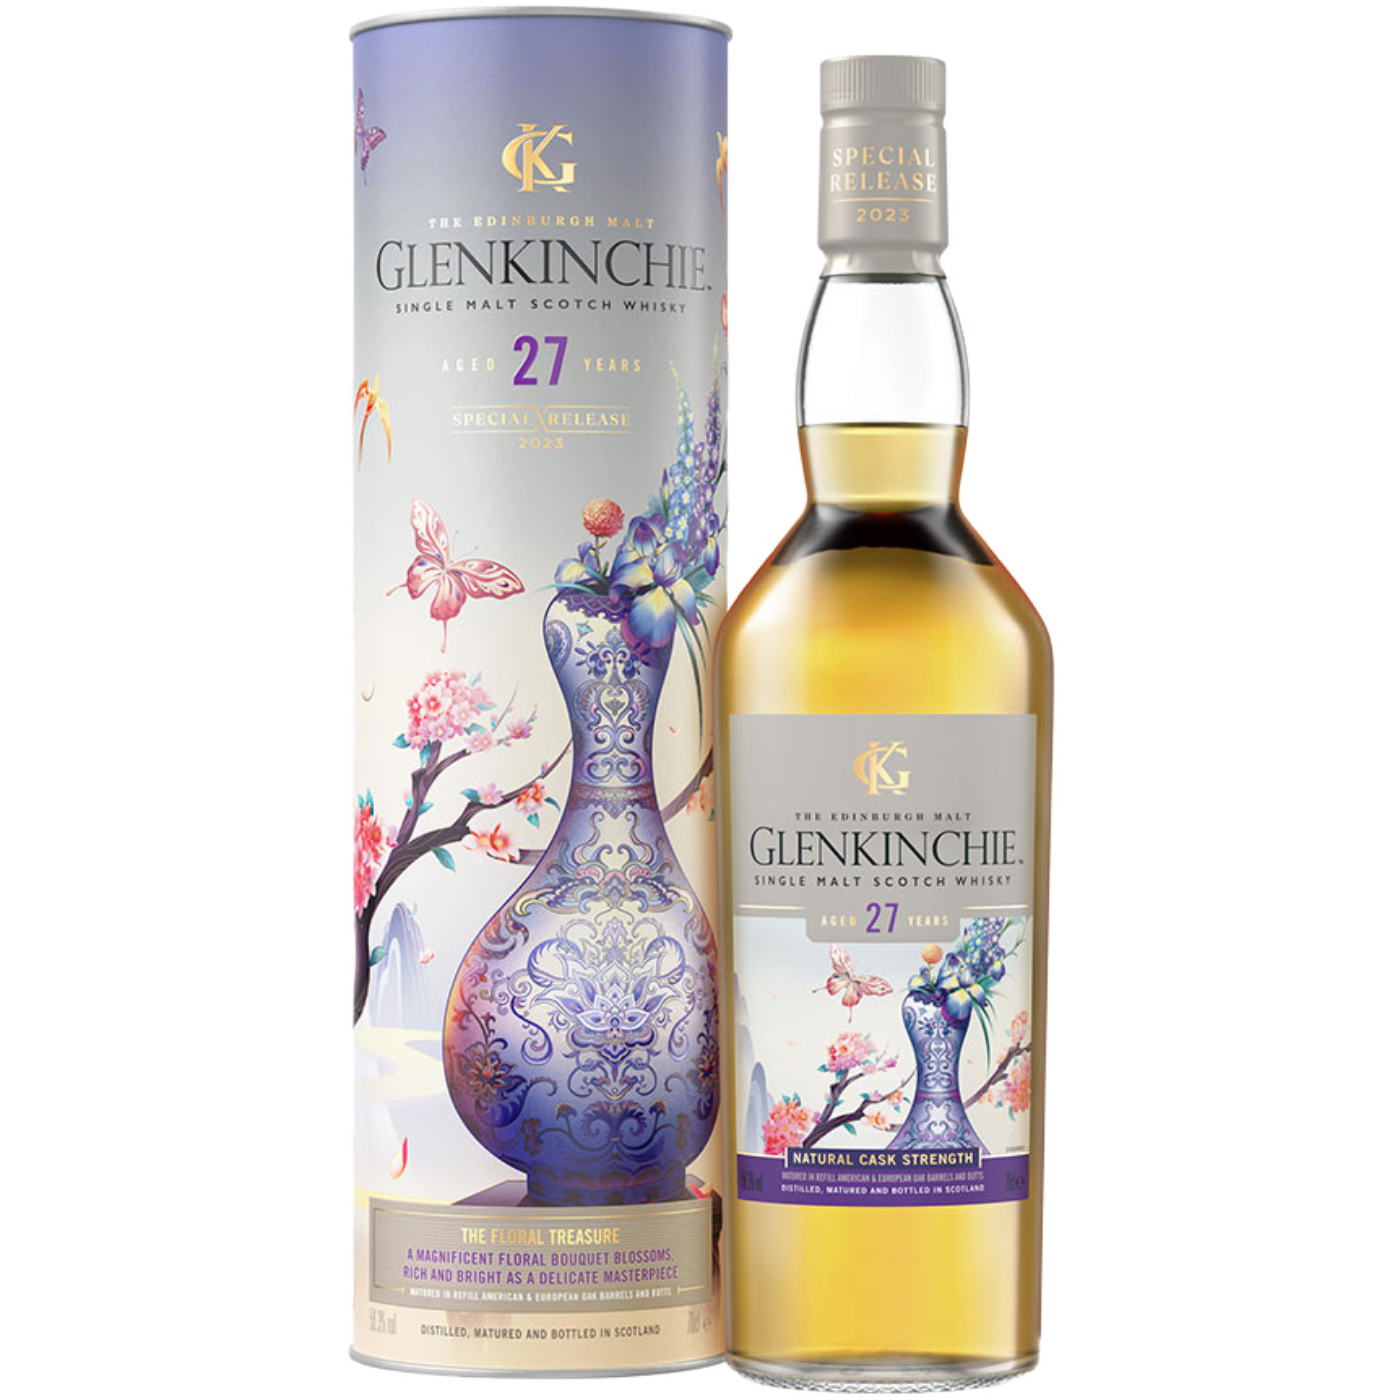 GLENKINCHIE 27 Y.O. (SPECIAL RELEASE 2023)